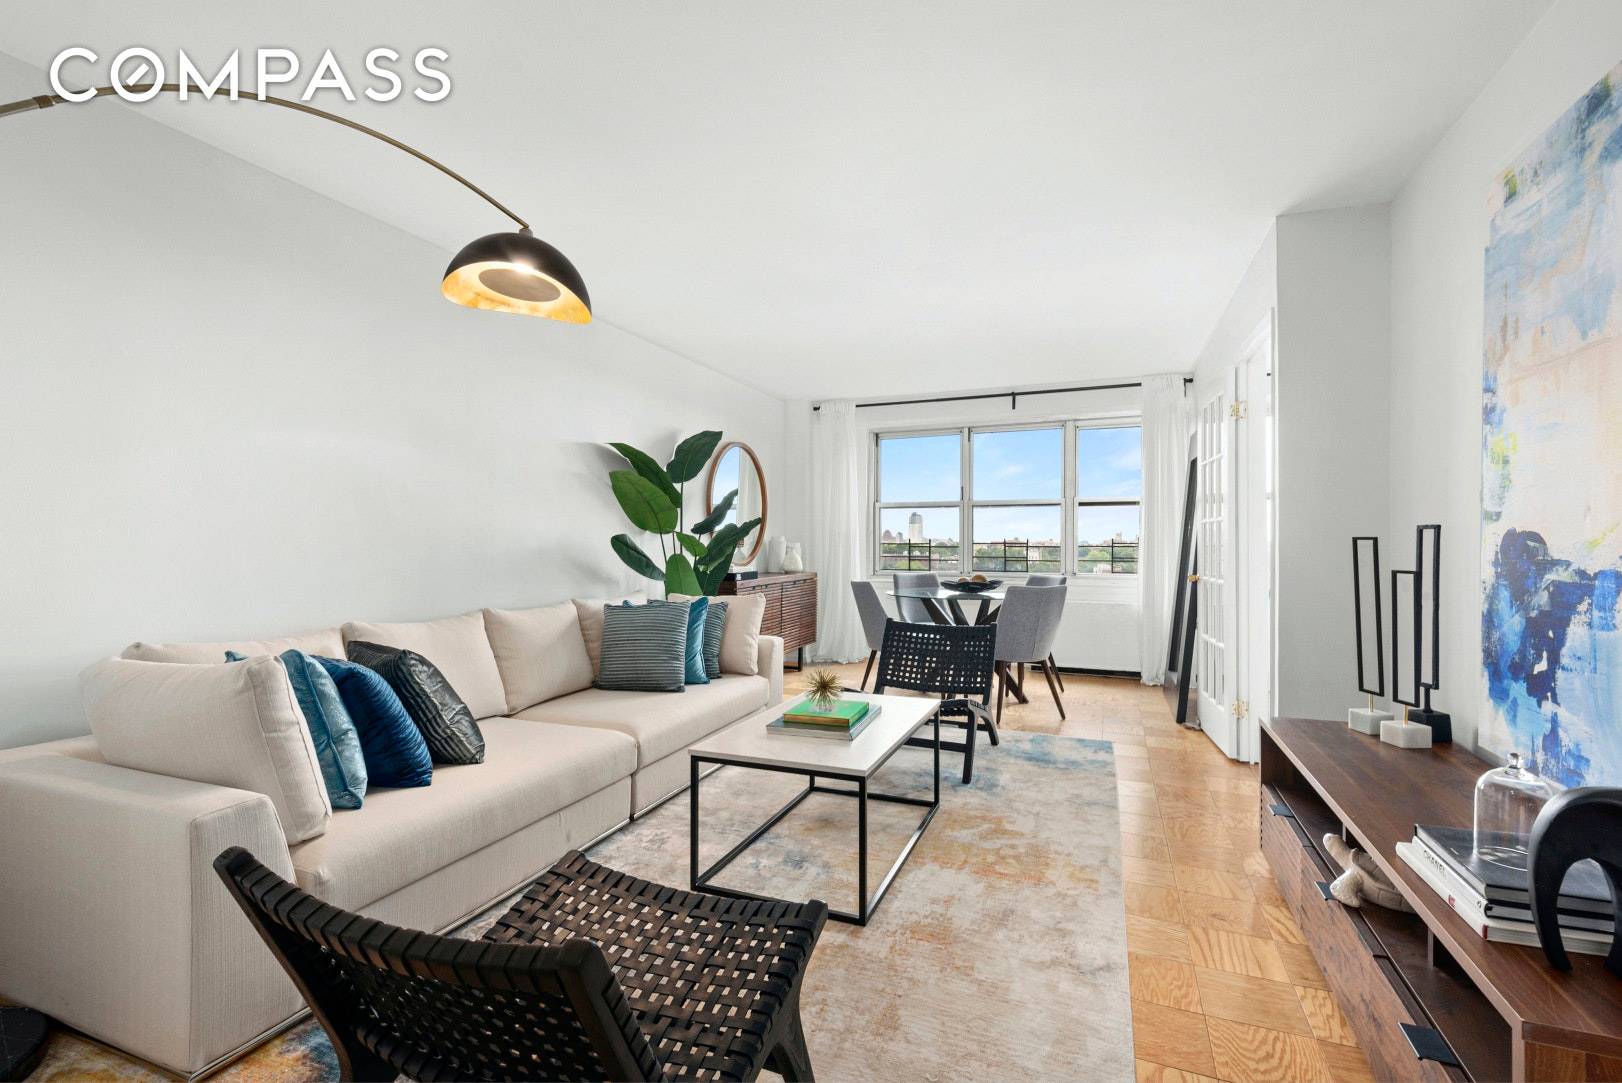 This pin drop quiet and light filled converted one bedroom apartment has views for miles in this mid century doorman building where Kensington meets Windsor Terrace.